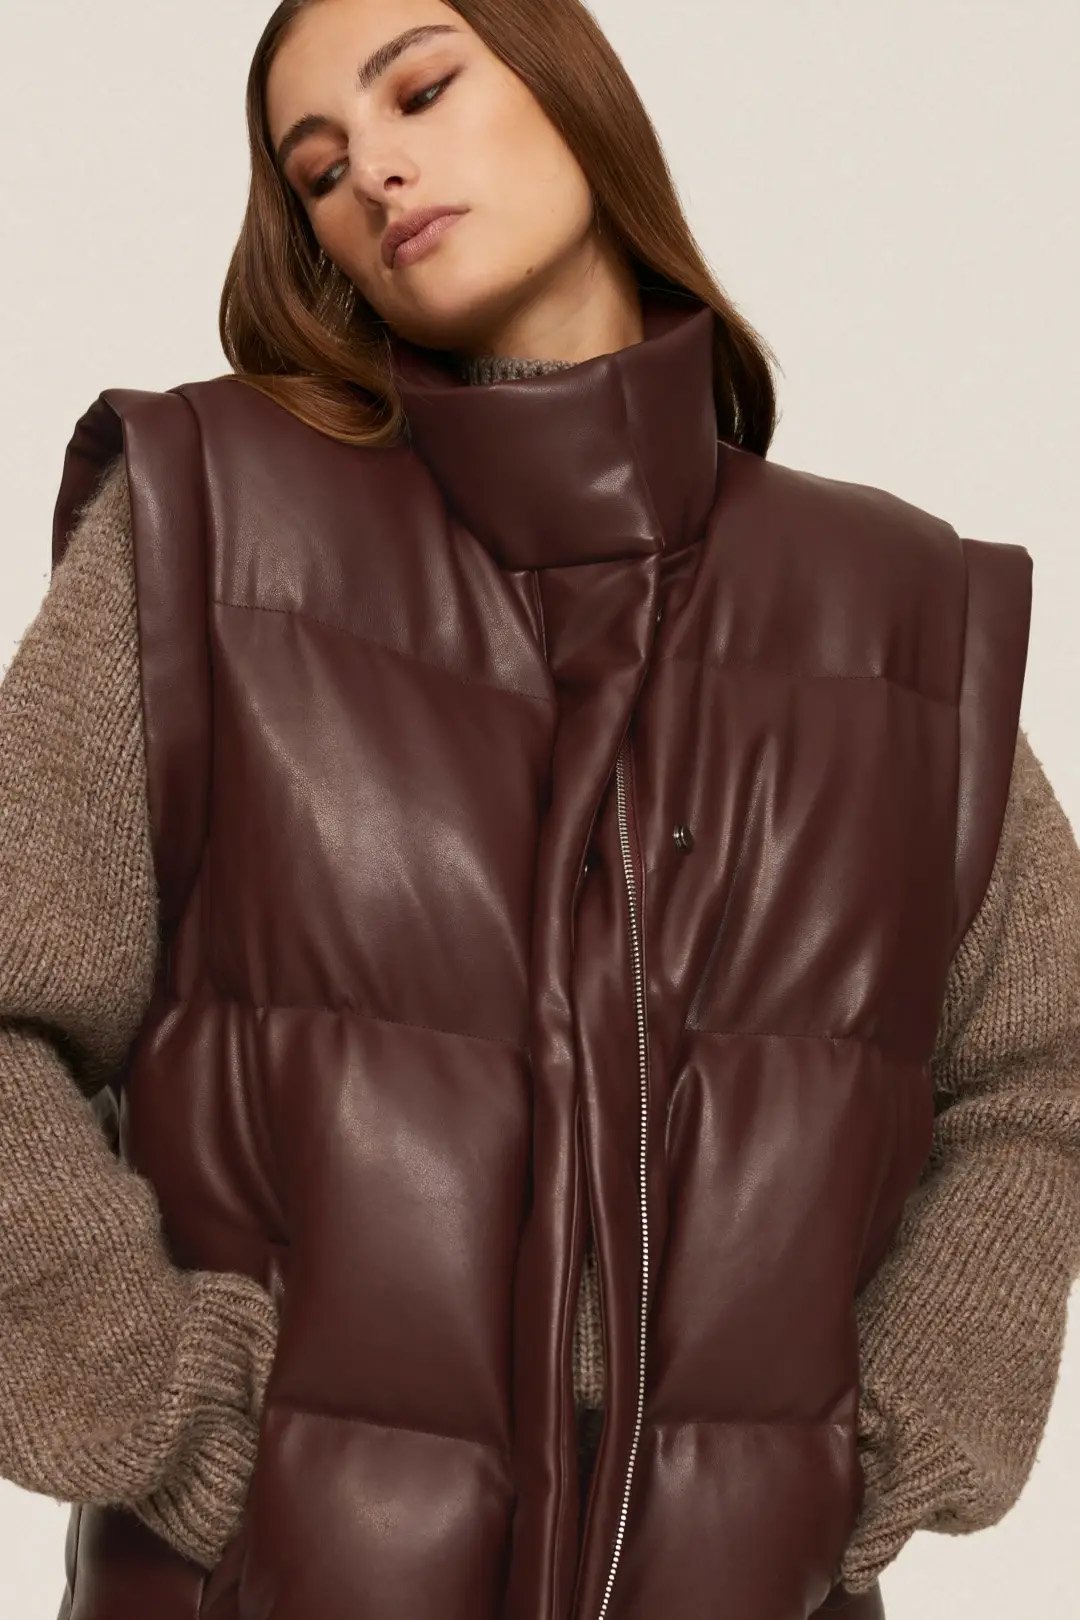 Peter Som Rent the Runway Puffer Vest Fashion Leather